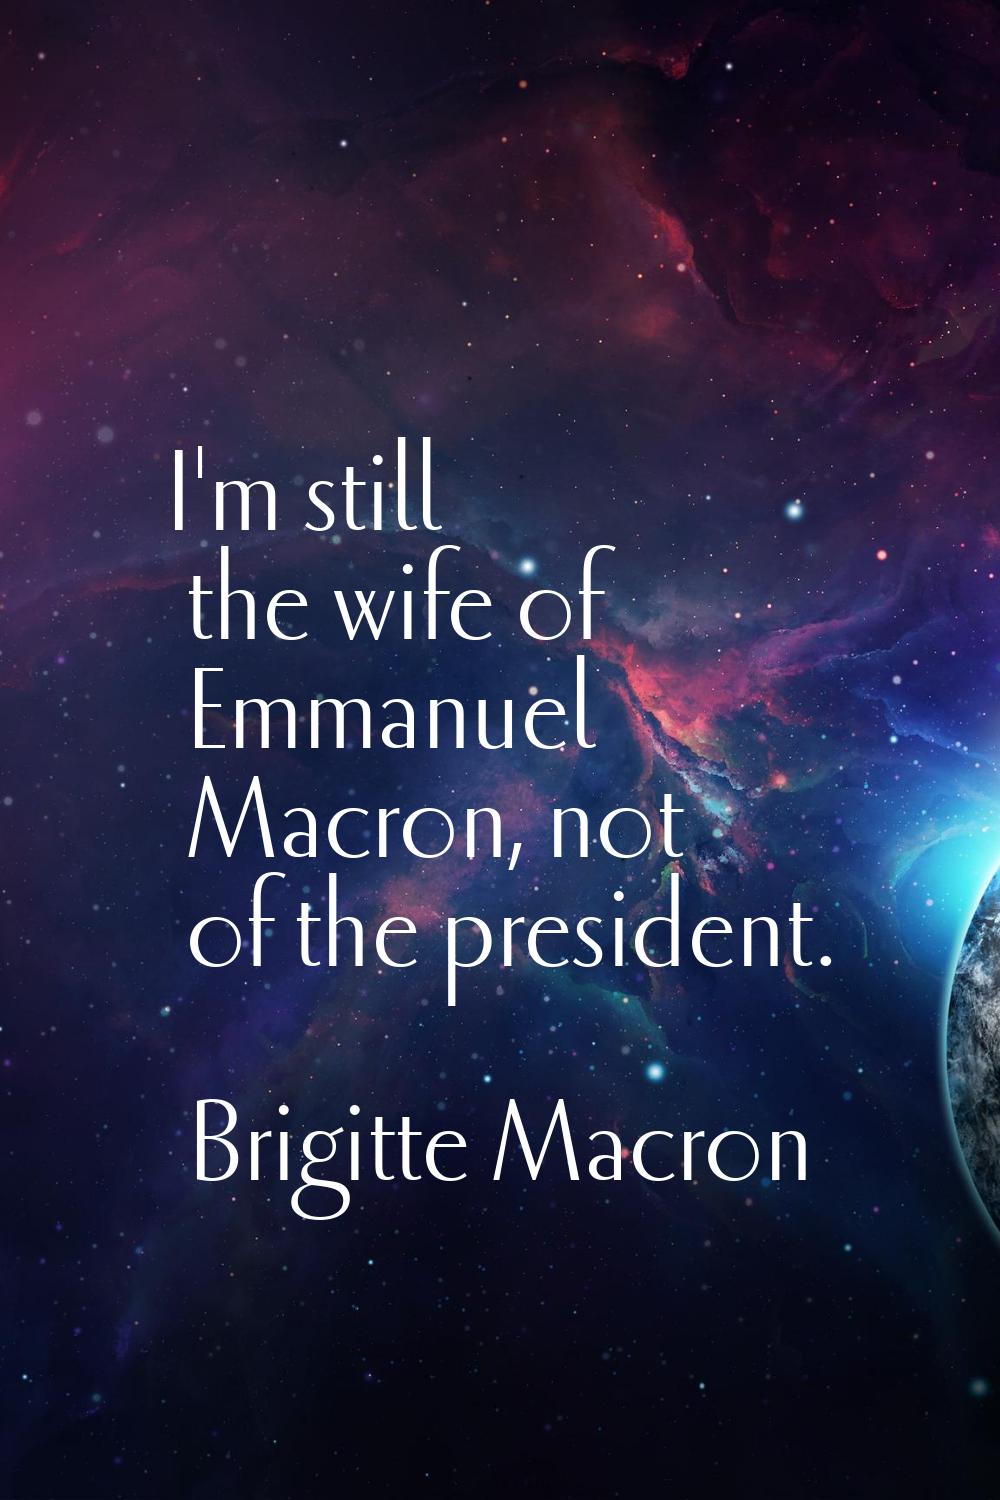 I'm still the wife of Emmanuel Macron, not of the president.